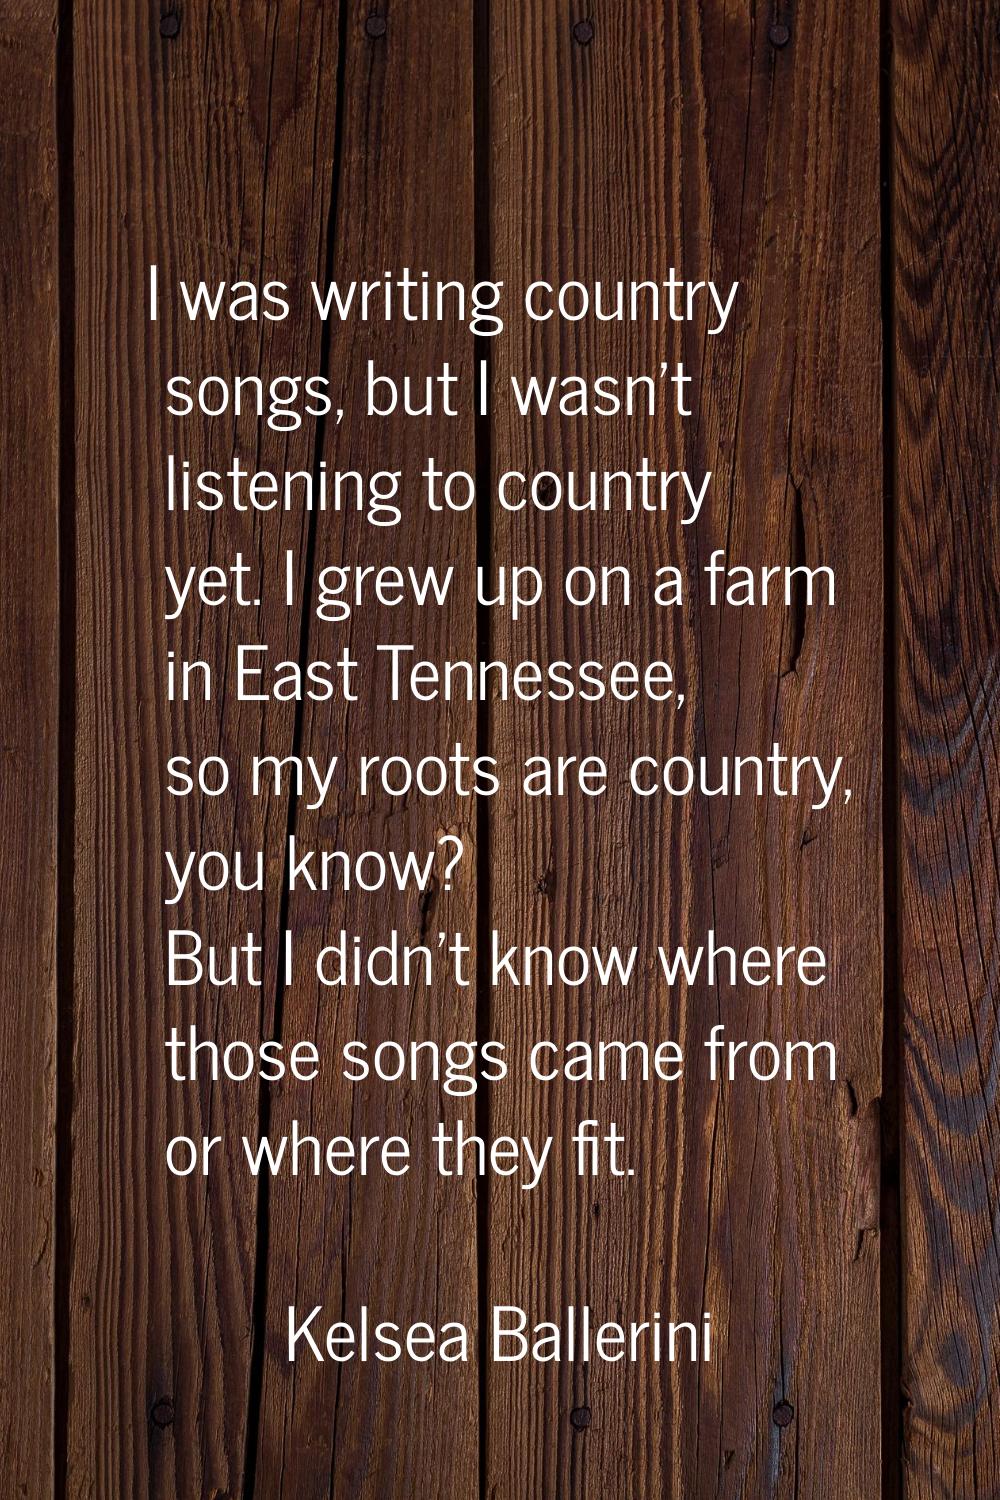 I was writing country songs, but I wasn't listening to country yet. I grew up on a farm in East Ten